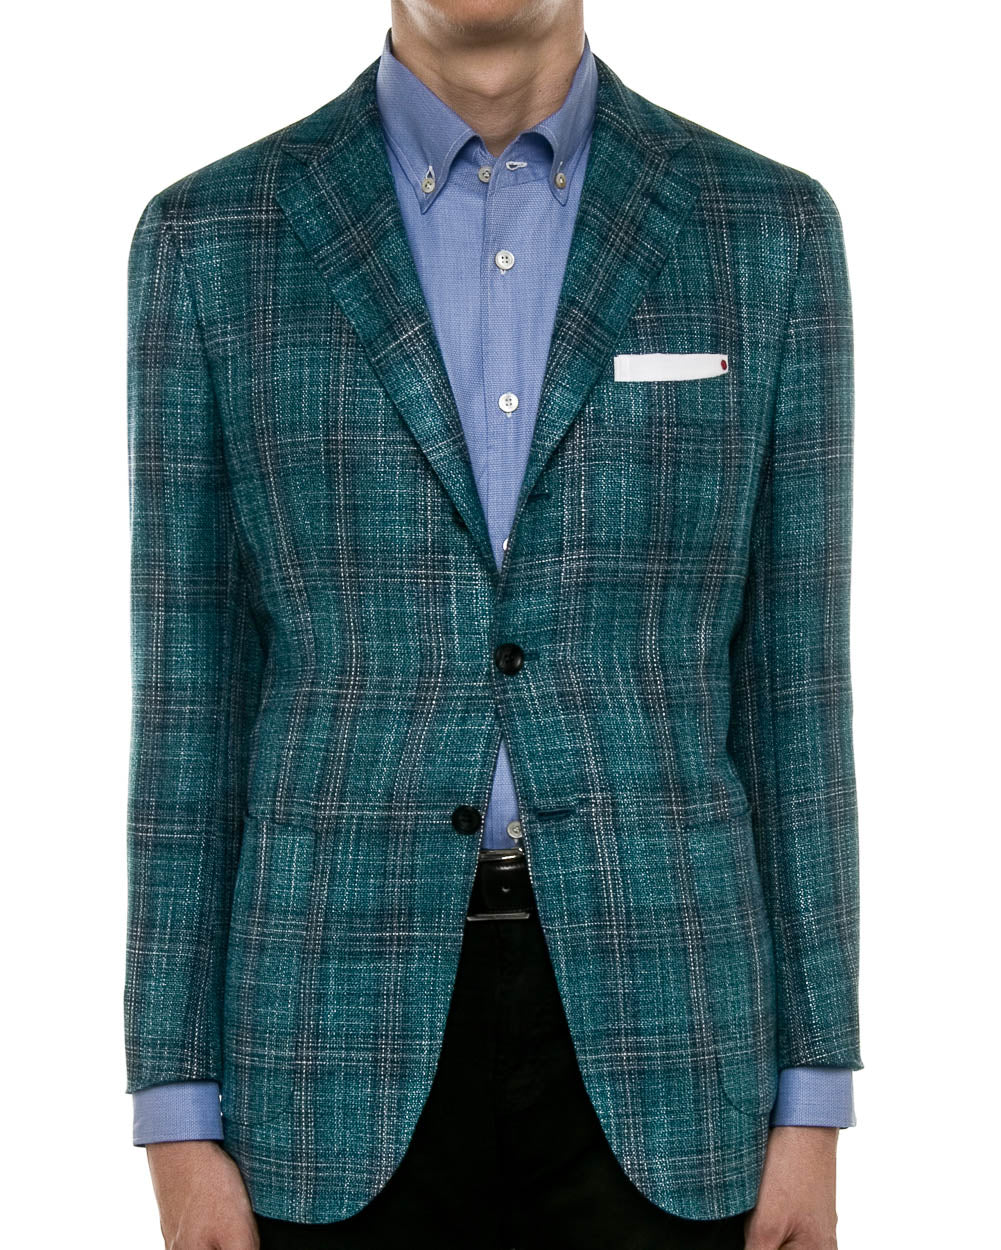 Teal and Blue Plaid Sportcoat